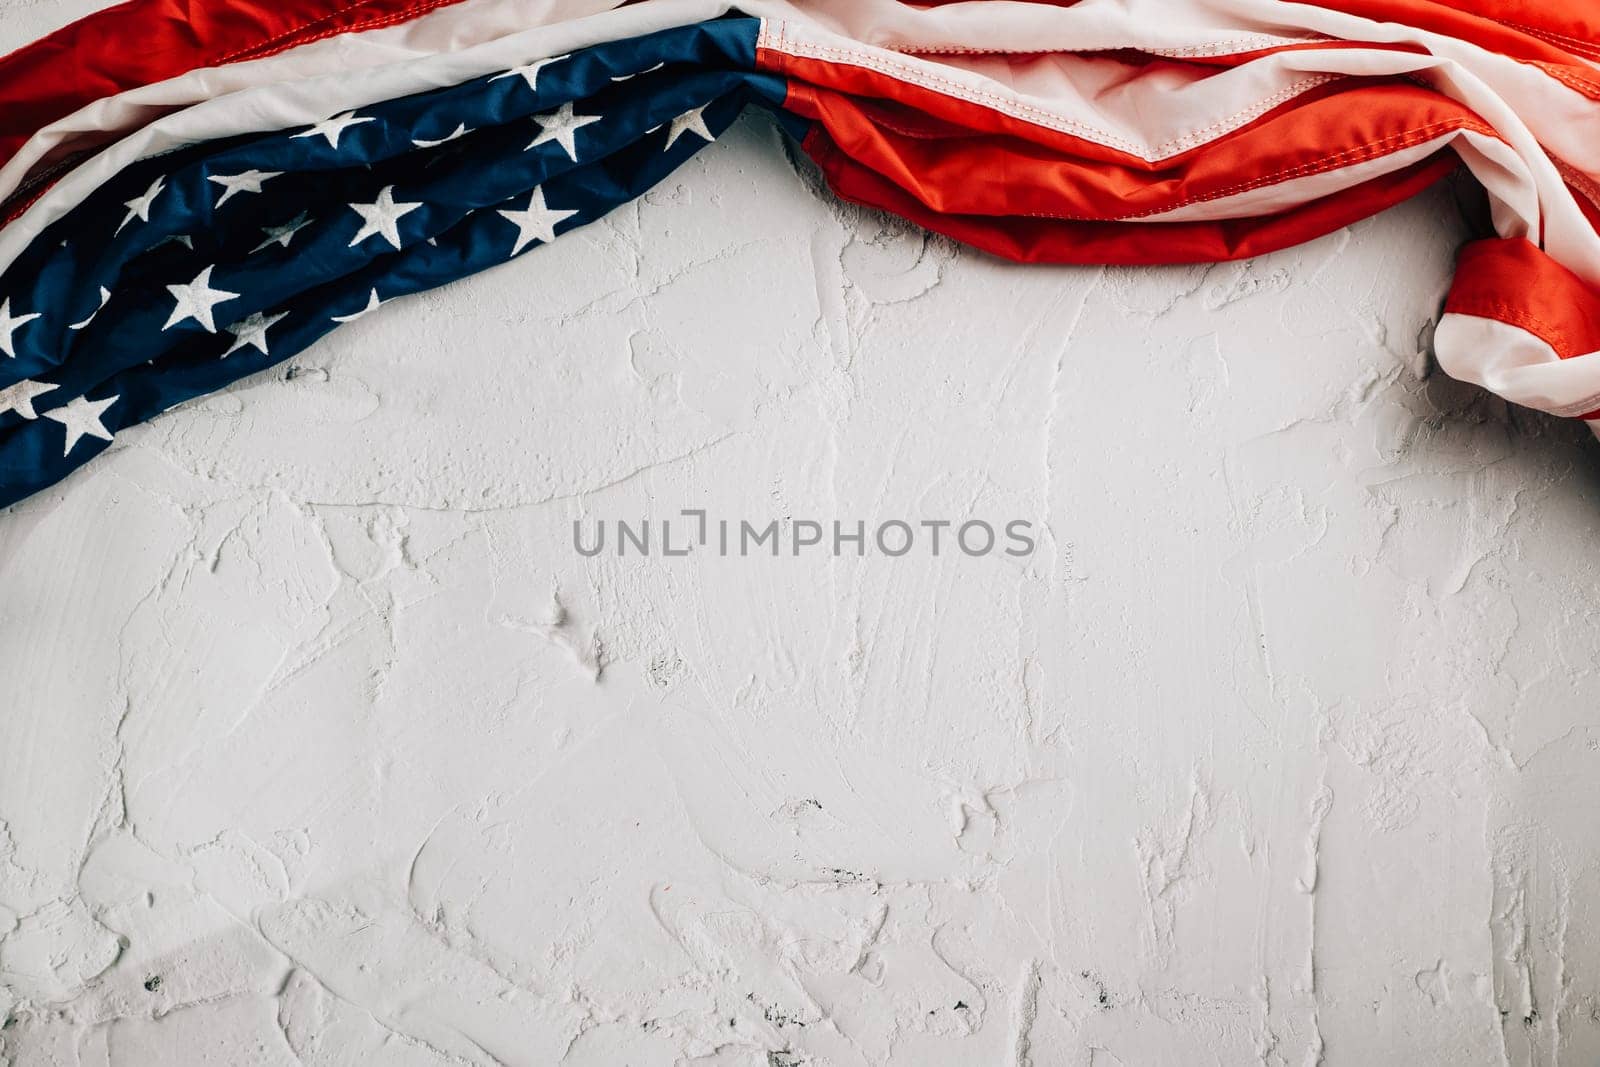 Vintage American flag for Veteran's Day, symbolizing honor, unity, and pride. Stars, stripes, and government in the USA are integral to patriotic glory. isolated on cement background